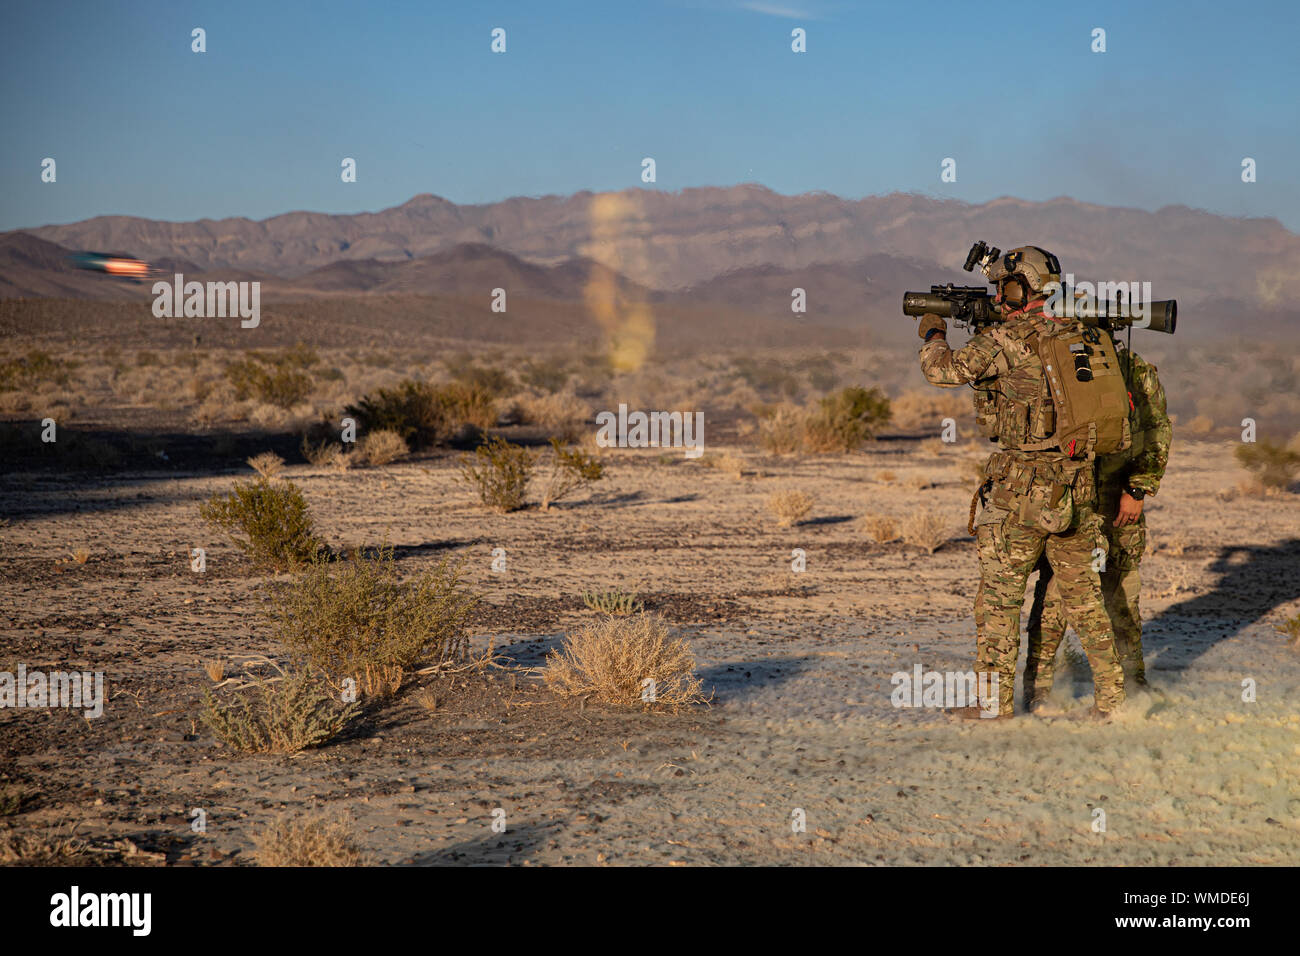 A Green Beret assigned to 3rd Special Forces Group (Airborne) fires an M3 Carl Gustaf Rocket launcher during a training event near Nellis Air Force Base, Nev., Aug. 26, 2019. U.S. Special Forces trained with U.S. Air Force Joint Terminal Attack Controllers and utilized weapons ranging from small arms to A-10 Thunderbolt ll aircraft. (U.S. Army photo by Sgt. Steven Lewis) Stock Photo